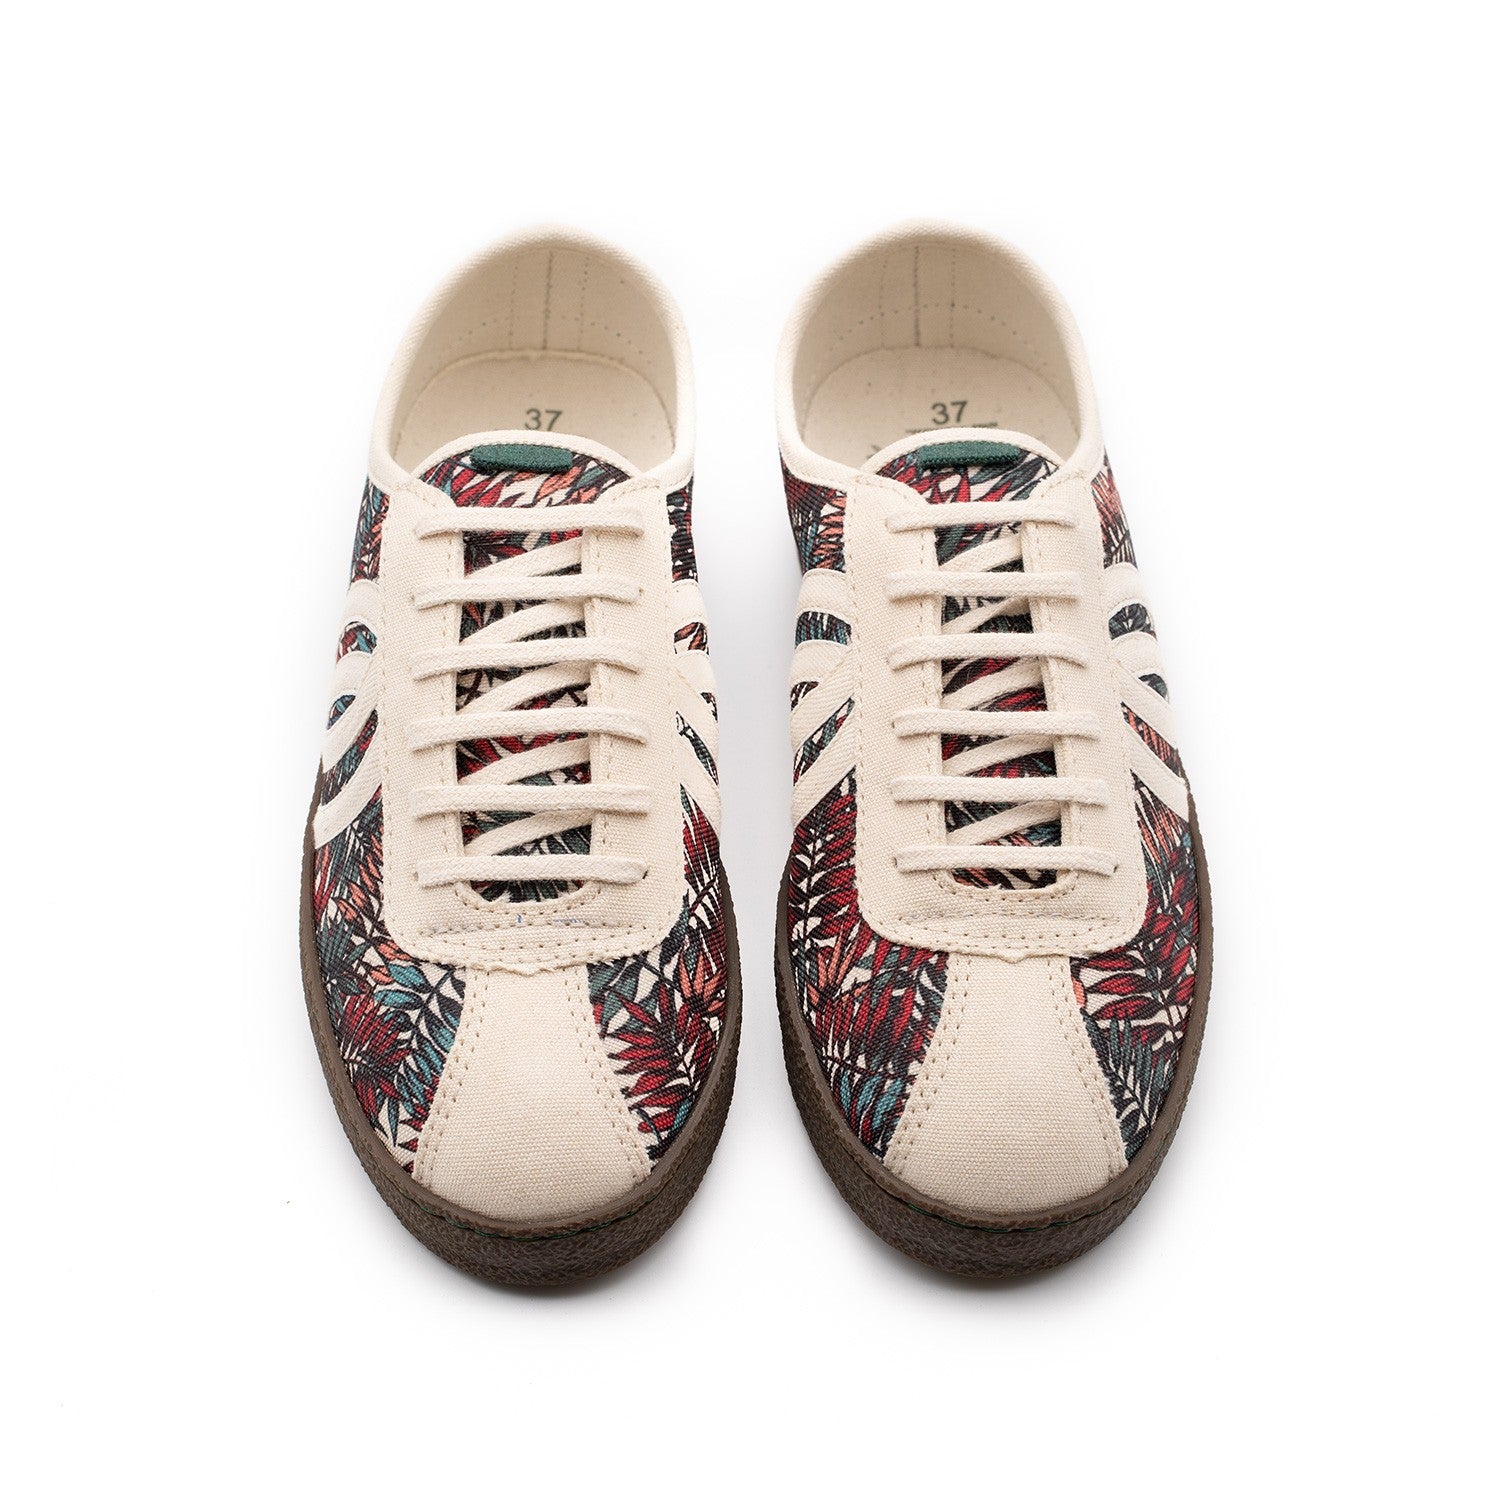 OFF WHITE RECYCLED LACES - VESICA PISCIS FOOTWEAR